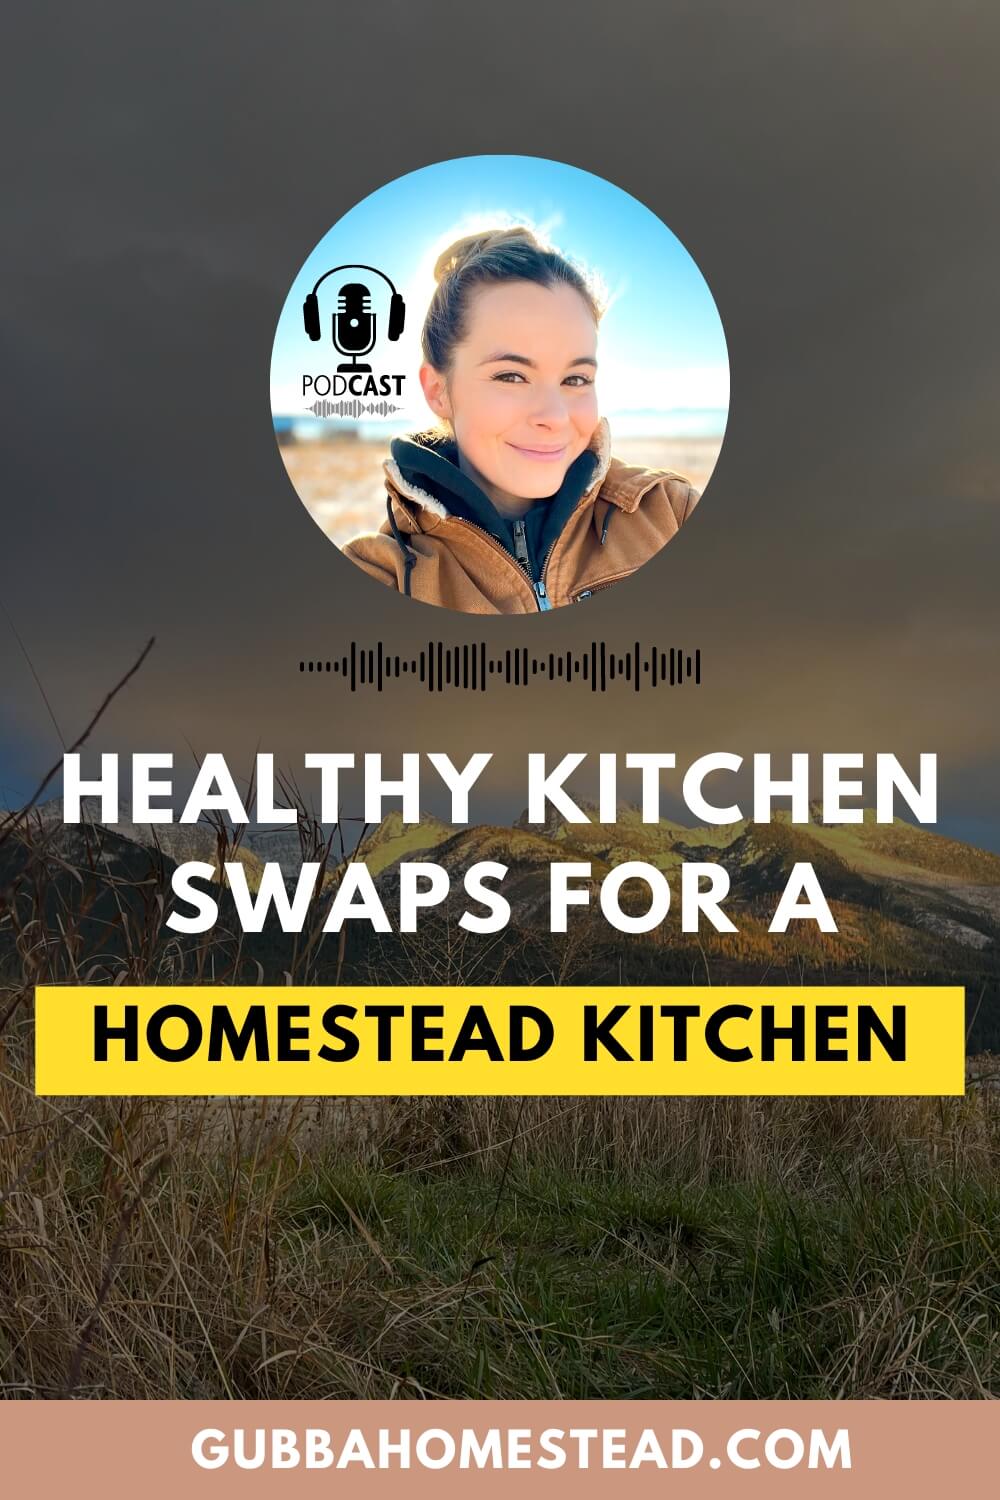 Healthy Kitchen Swaps For a Homestead Kitchen